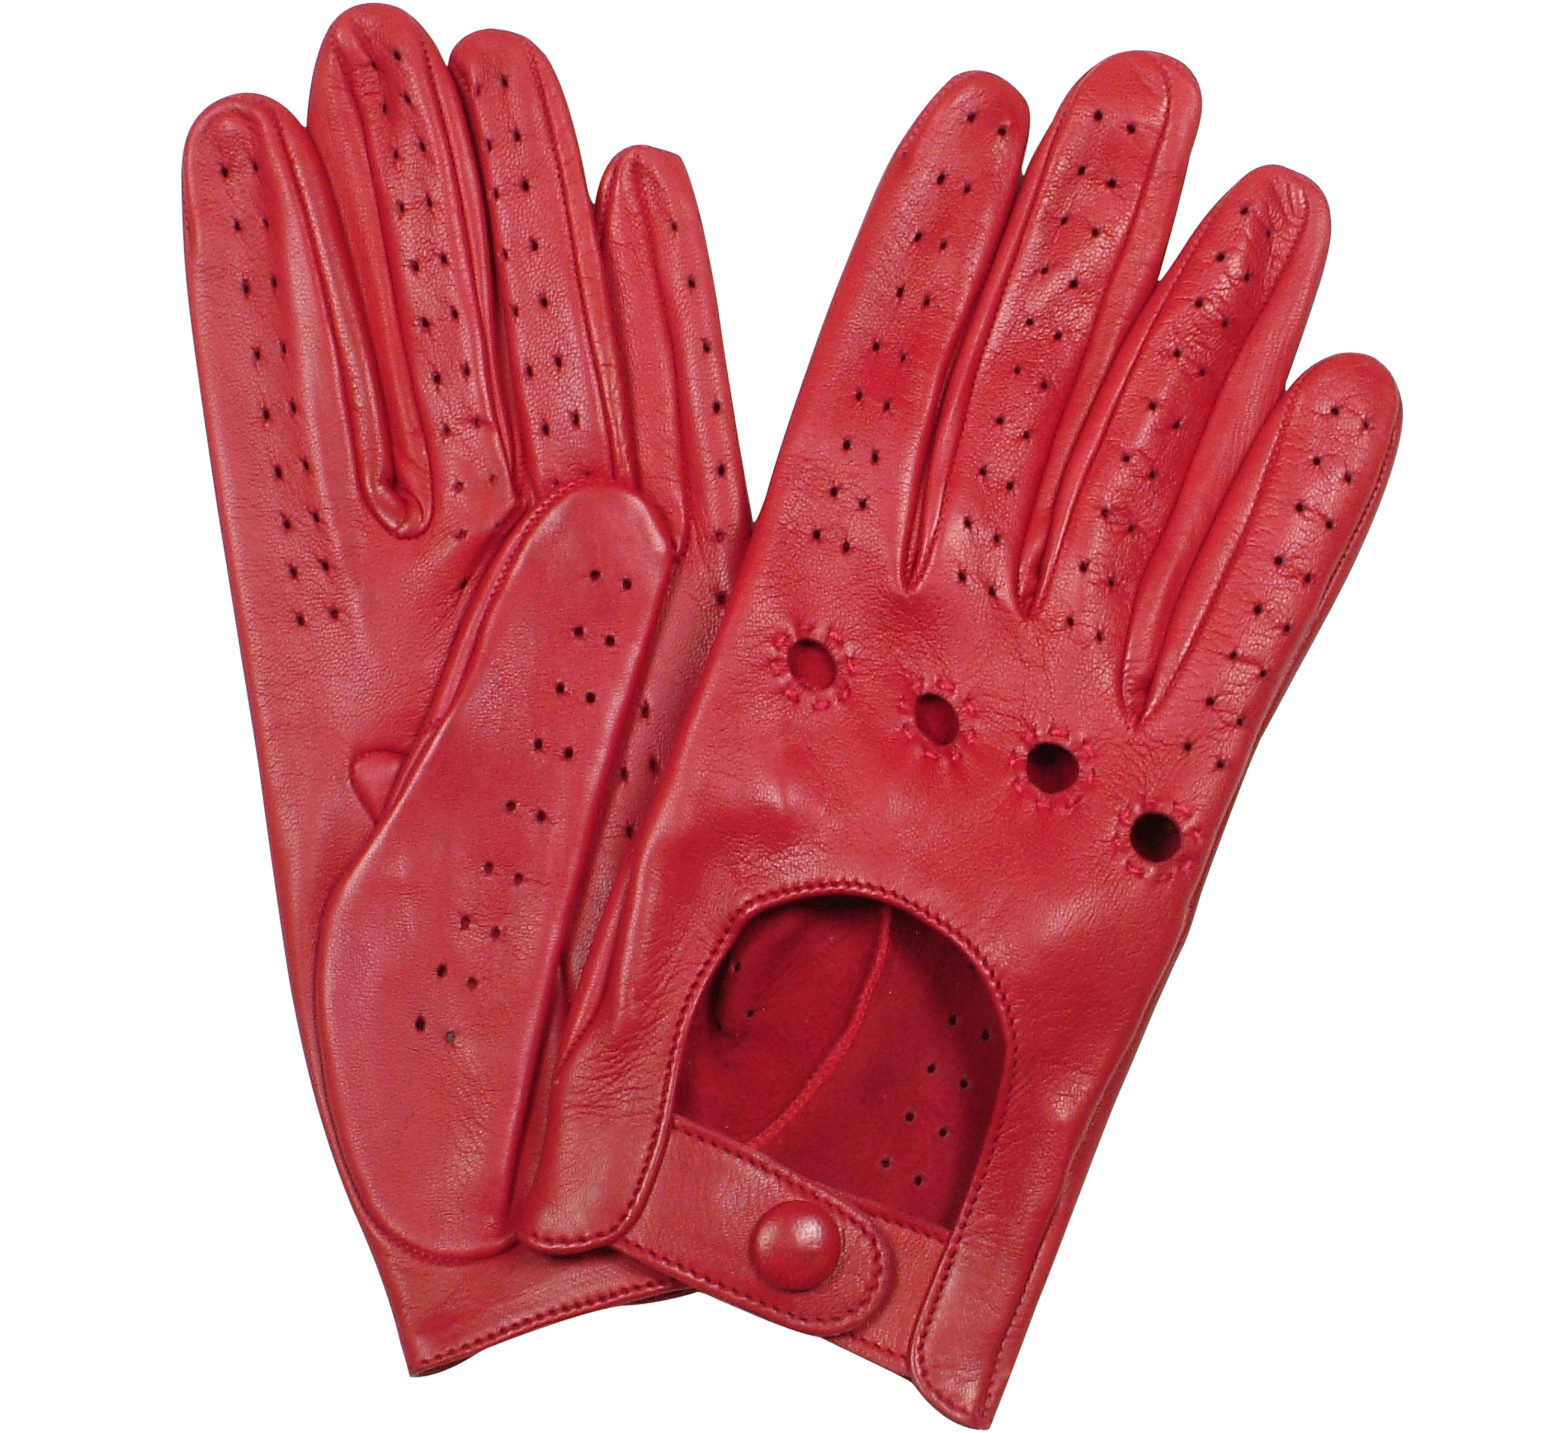 Women's Red Perforated Italian Leather Driving Gloves